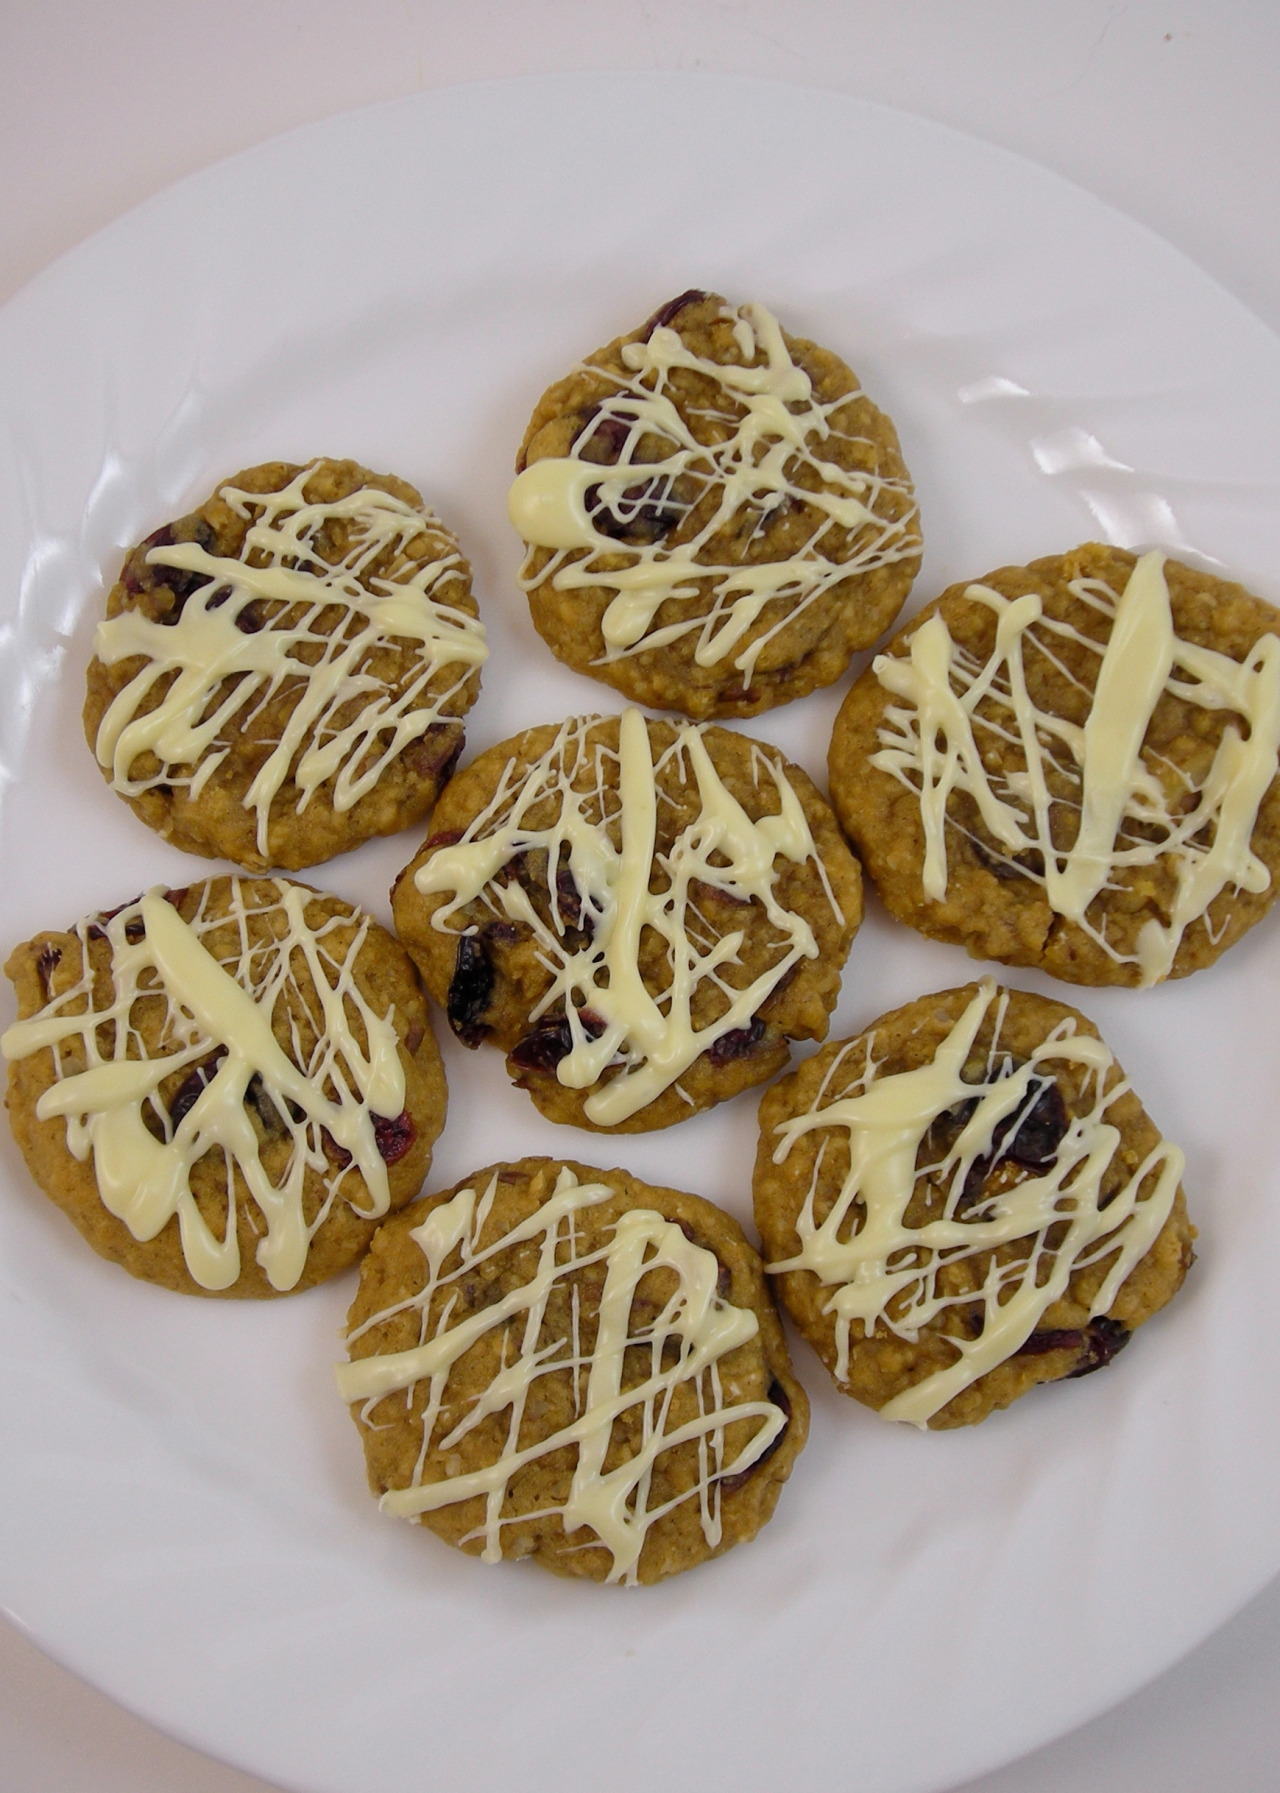 Lazy picture of Christmas cookie #5: White Chocolate Dipped Cranberry Oatmeal Cookies
Except I drizzled, not dipped. I only made these and the ginger cookies (#6) that I made last year (recipe from Cook’s Illustrated) because one of my sisters...